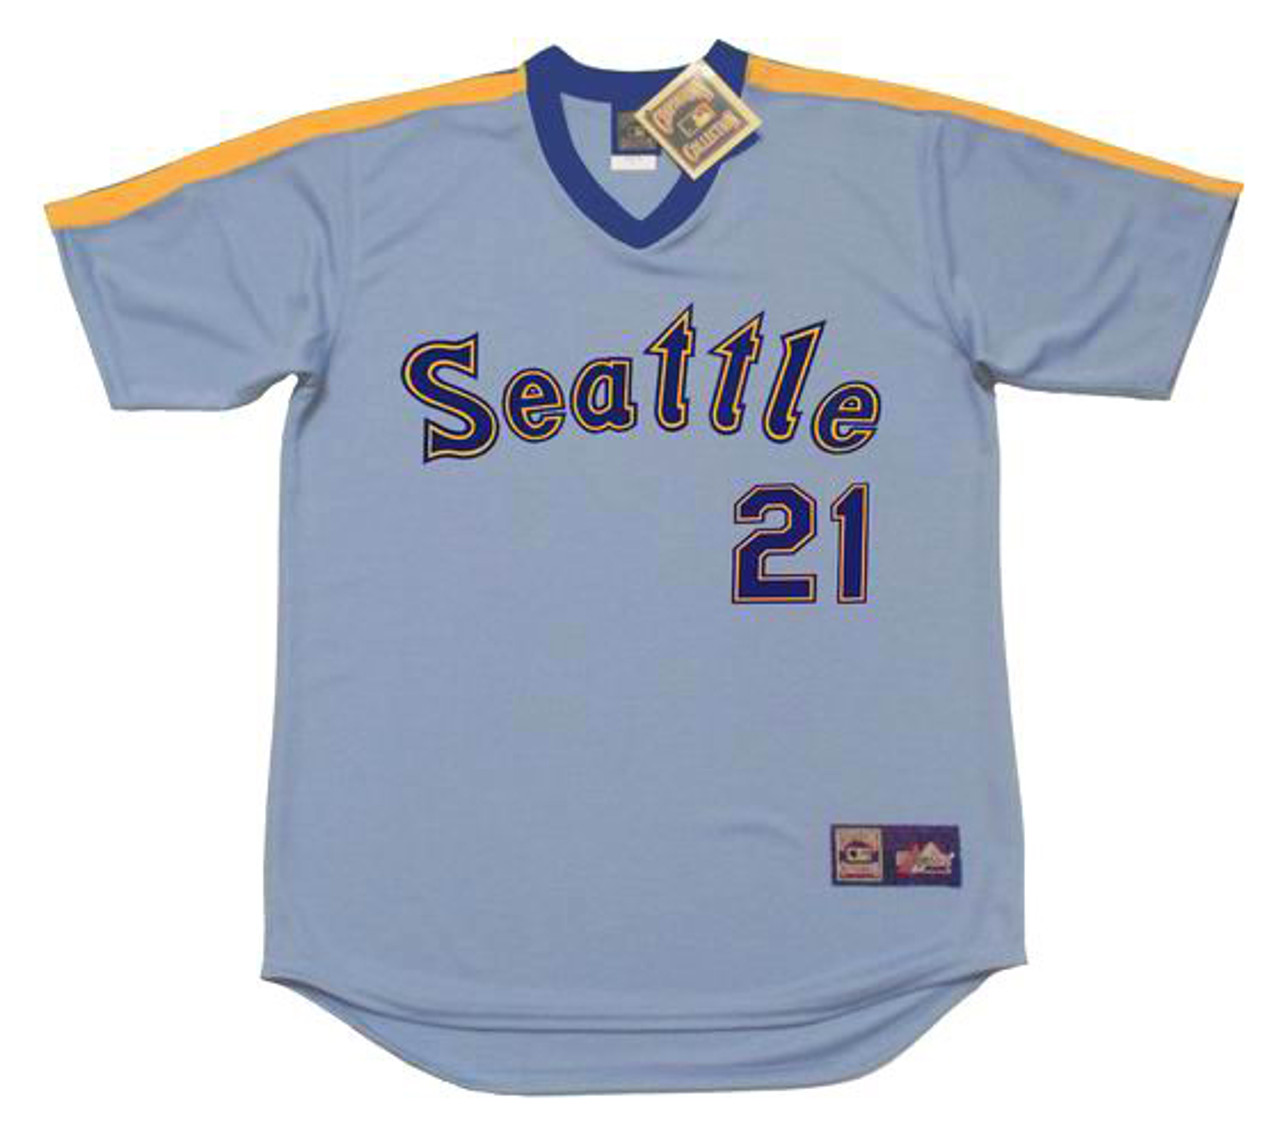 mariners 1984 jersey, Off 79%